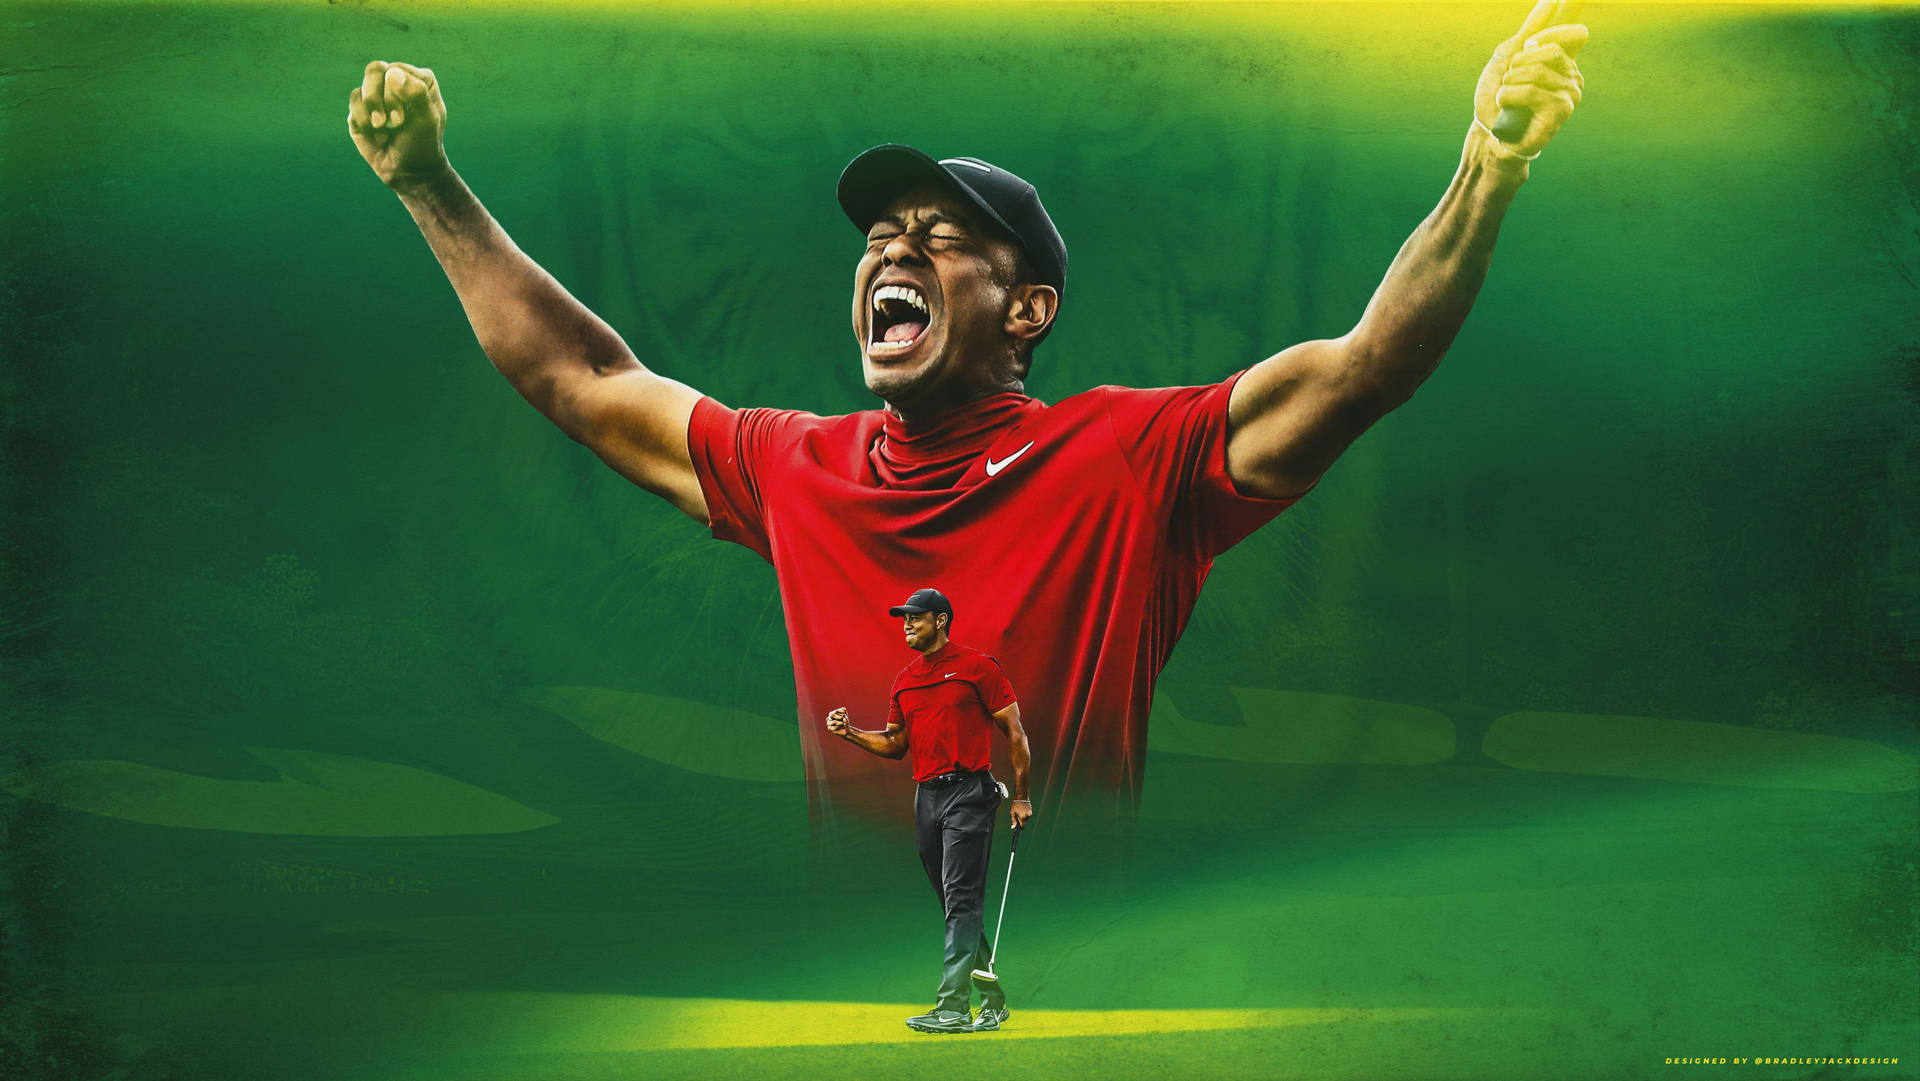 Tiger Woods Masters Green Background Wallpaper